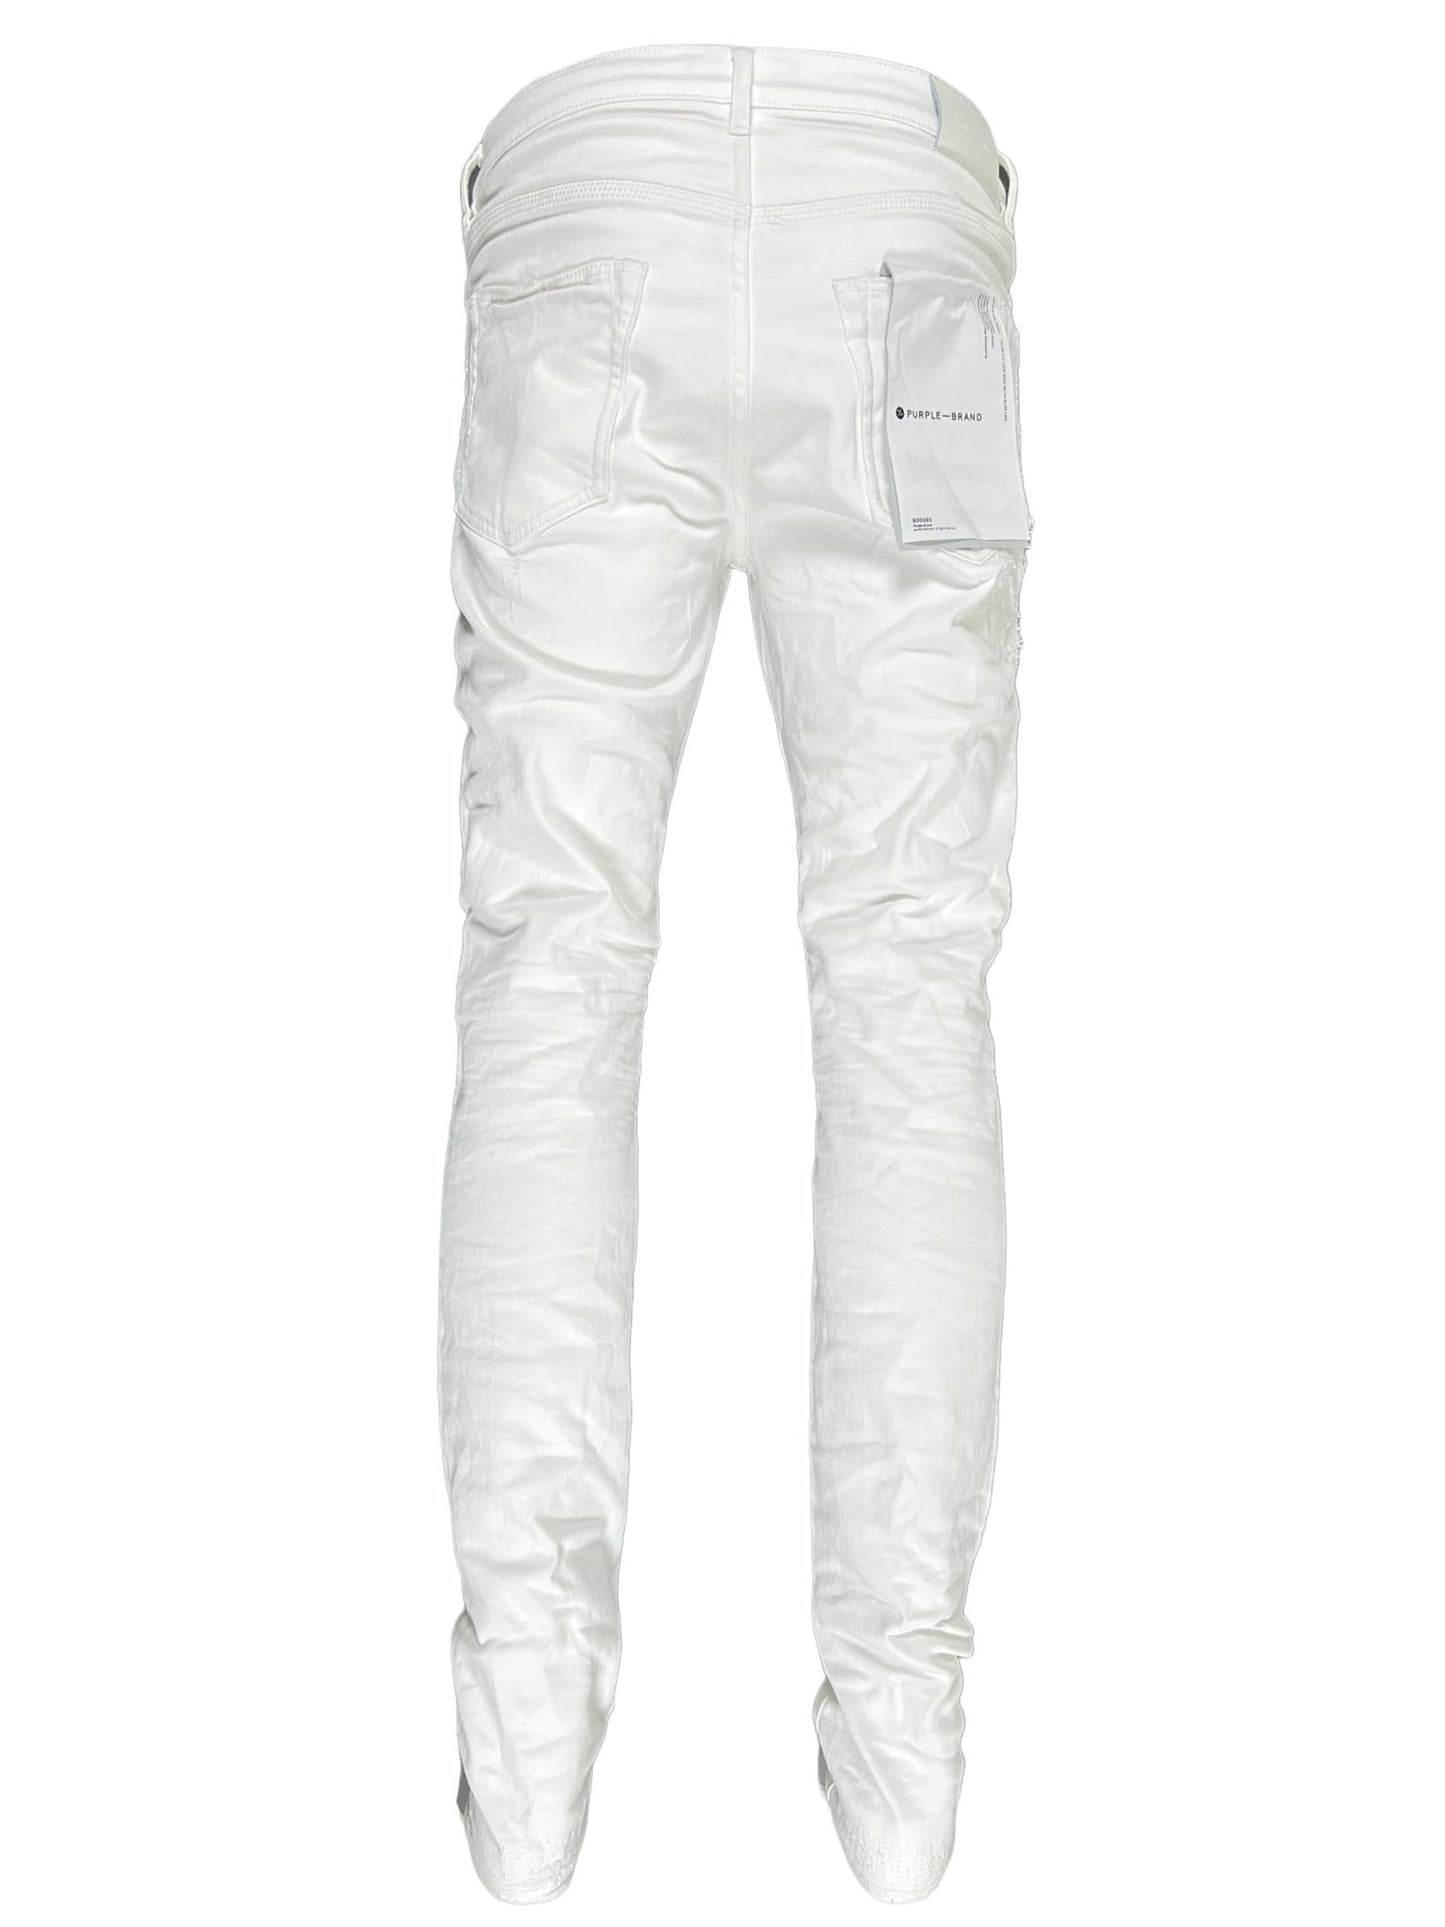 Purple Brand's P001-LDWH Light Destroy White shredded jeans isolated on a black background, featuring rear view with visible pockets and a label on the right pocket.